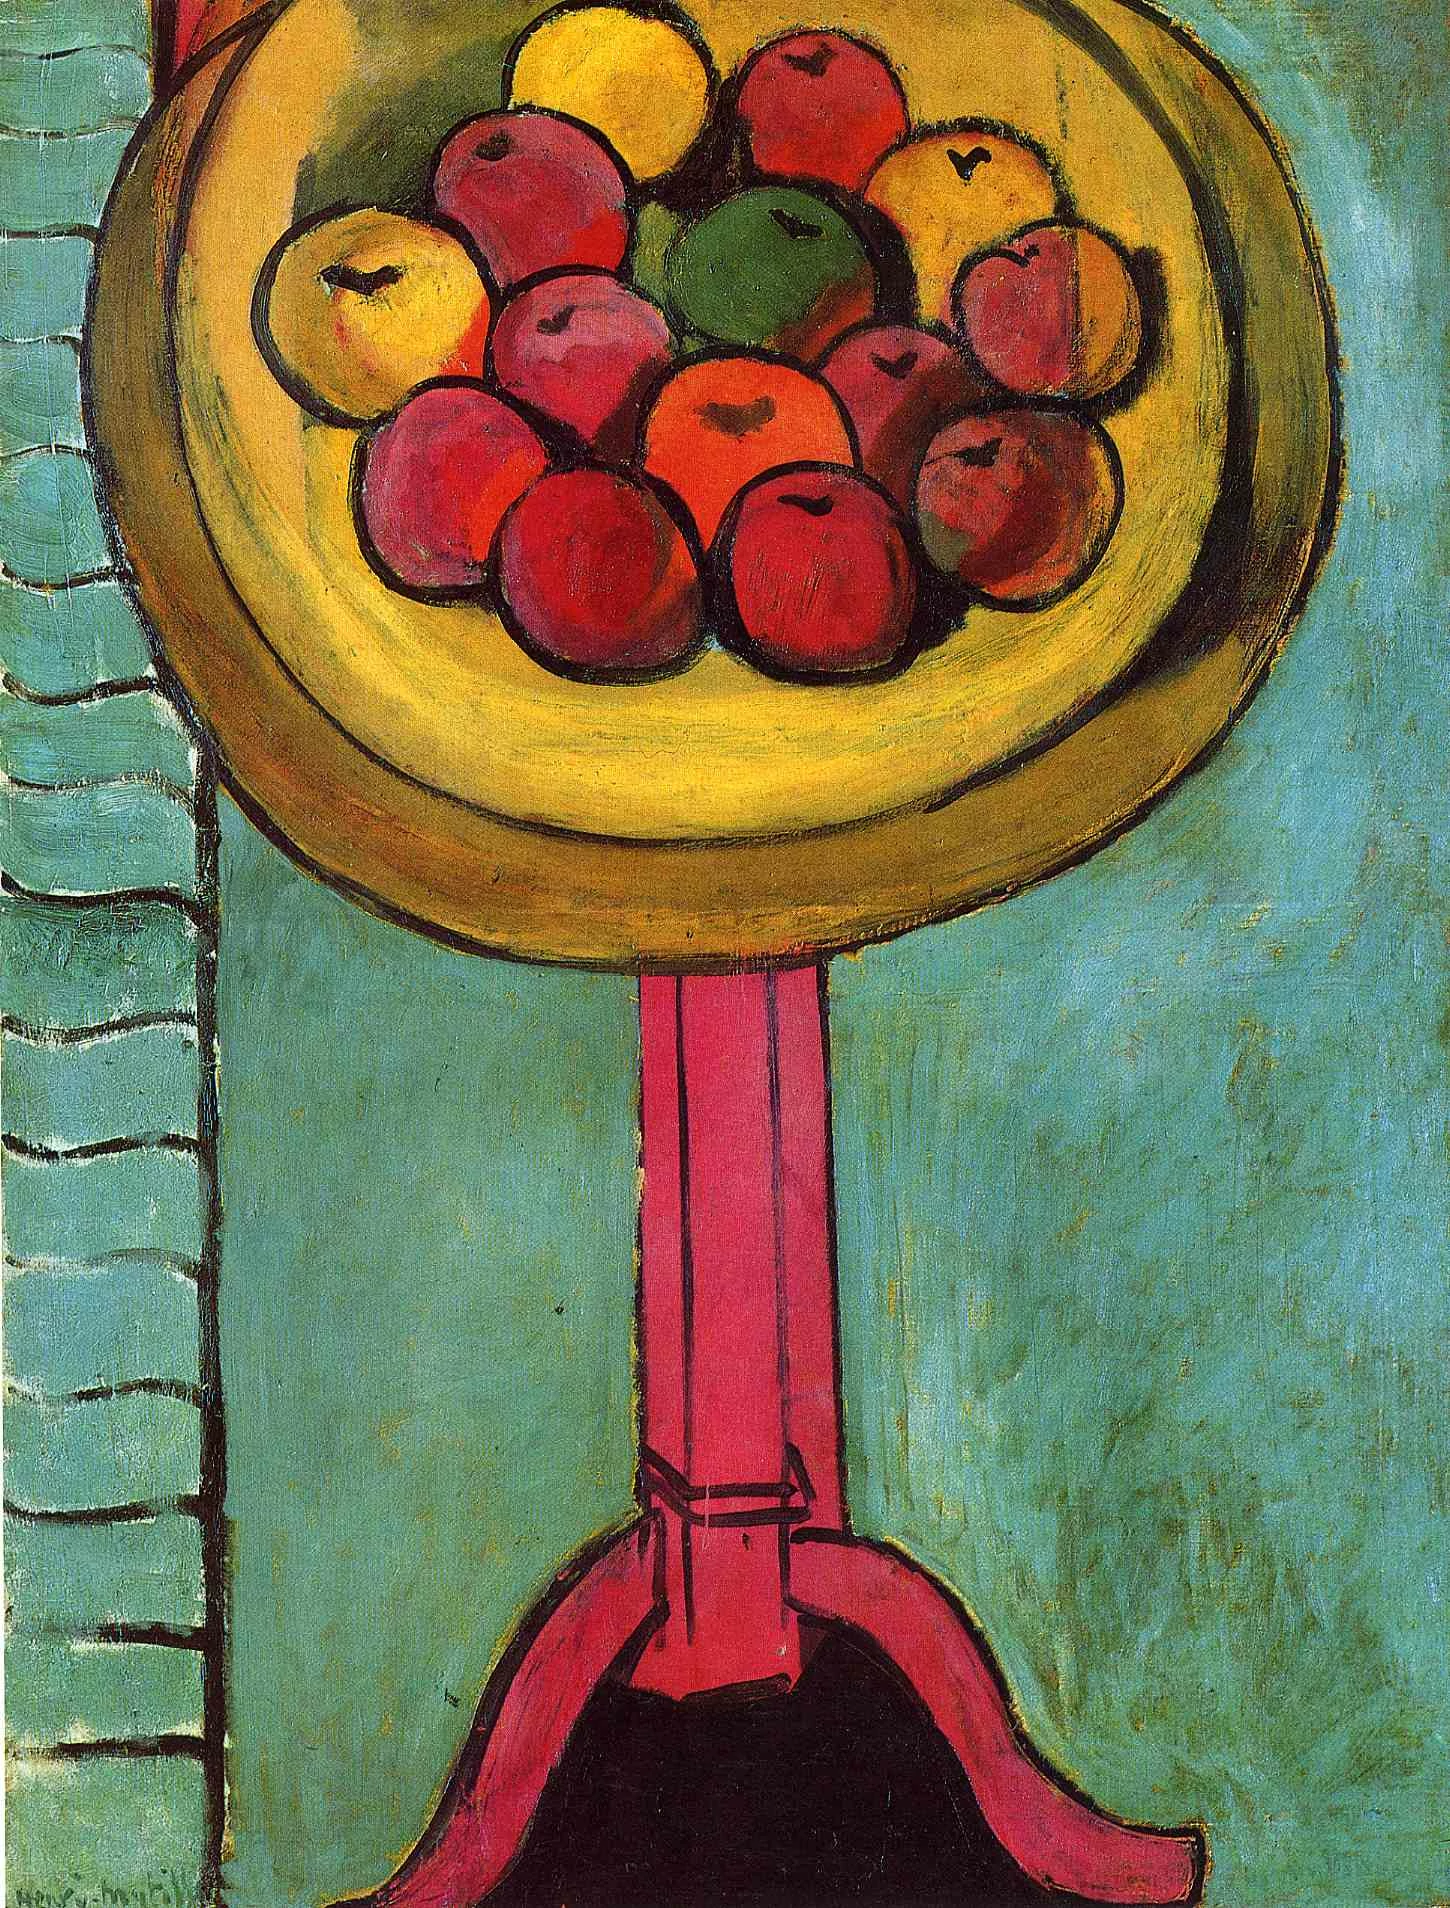 Apples on a Table - Green Background, Henri Matisse